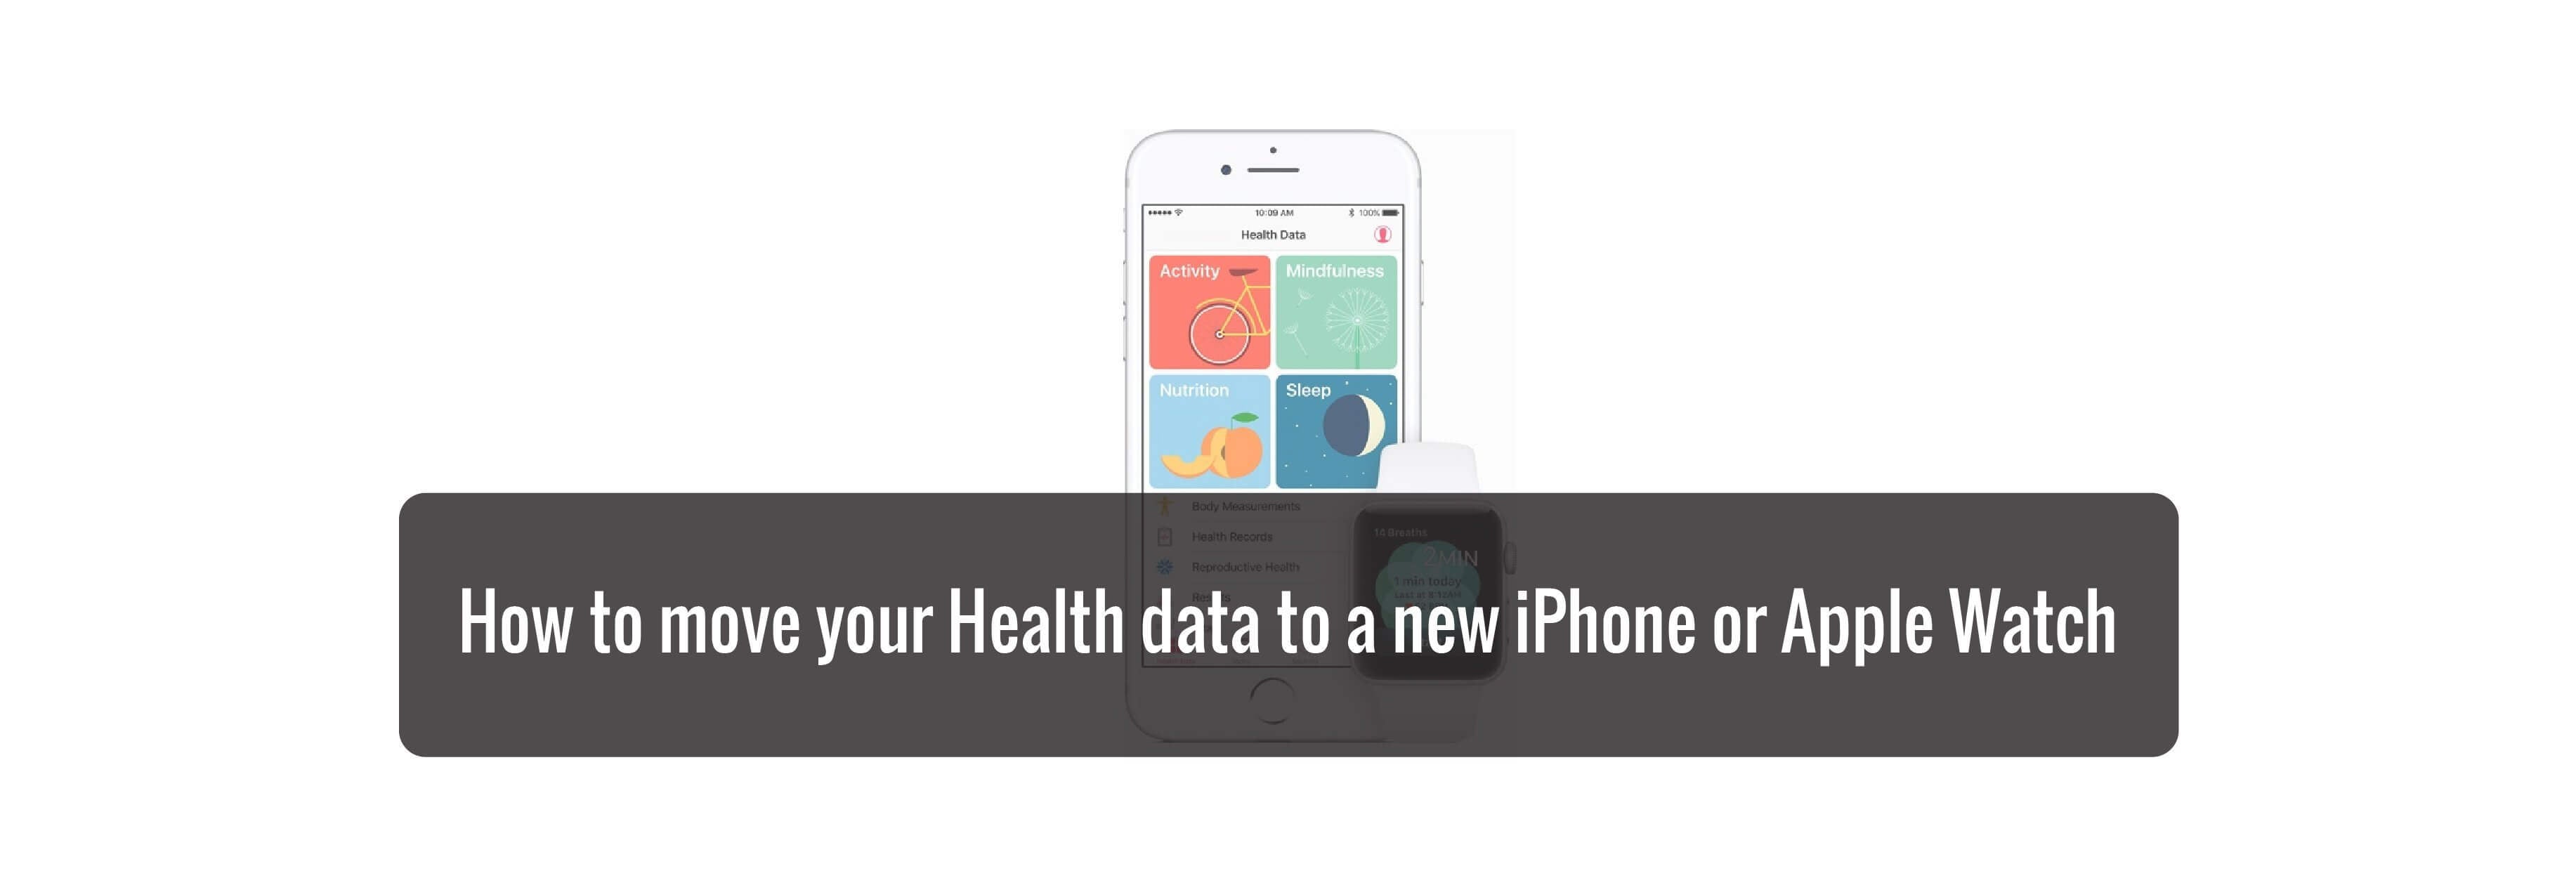 How to move your Health data to a new iPhone or Apple Watch